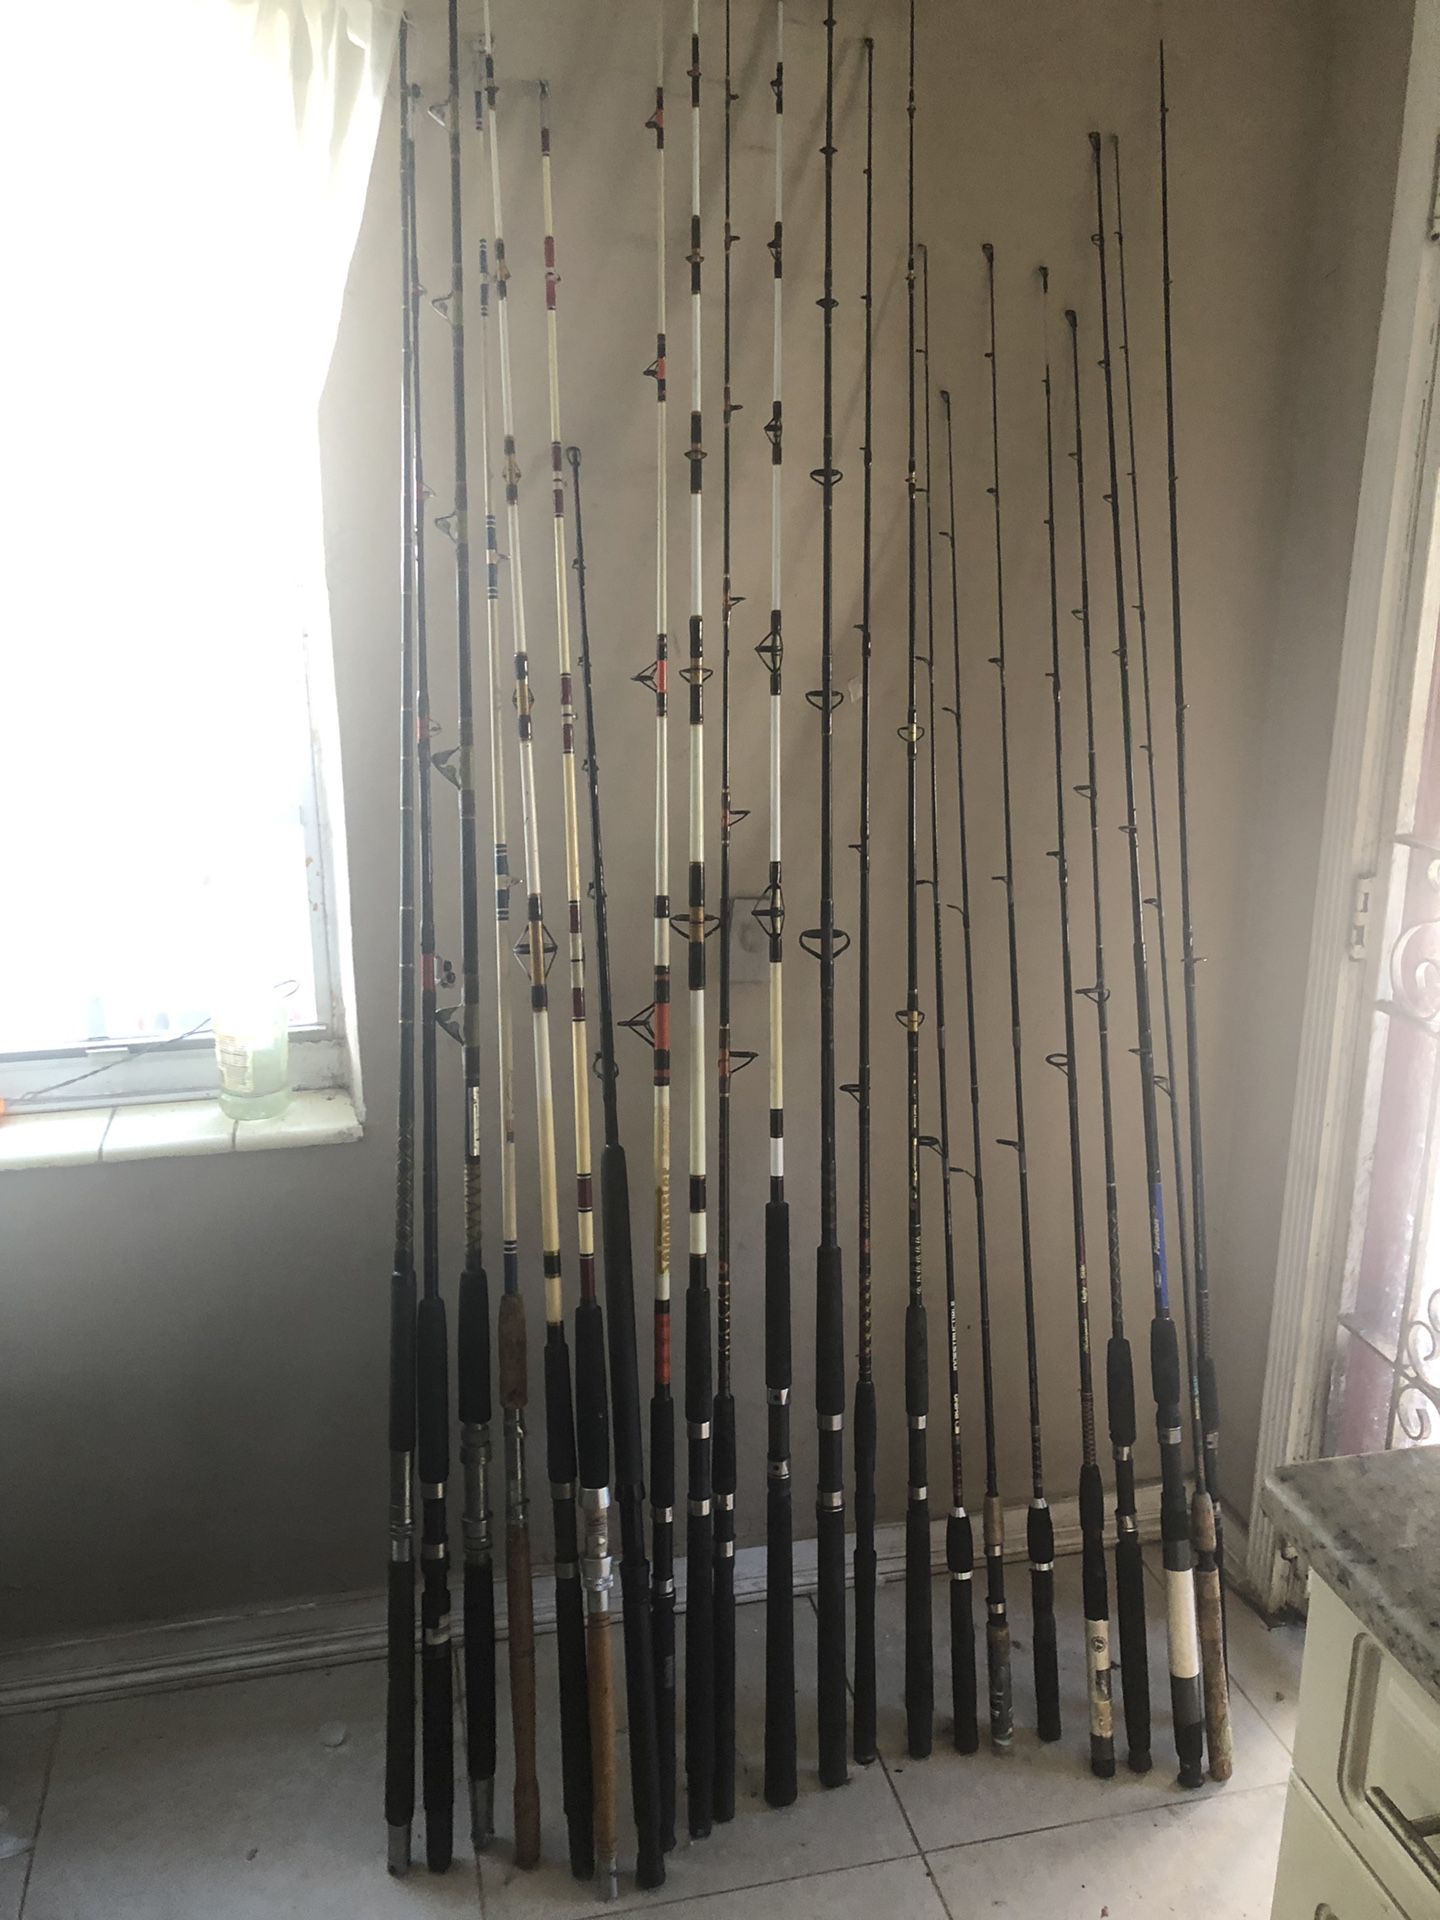 Fishing rods for sale ...Different prices $$ Only local please i am in Miami